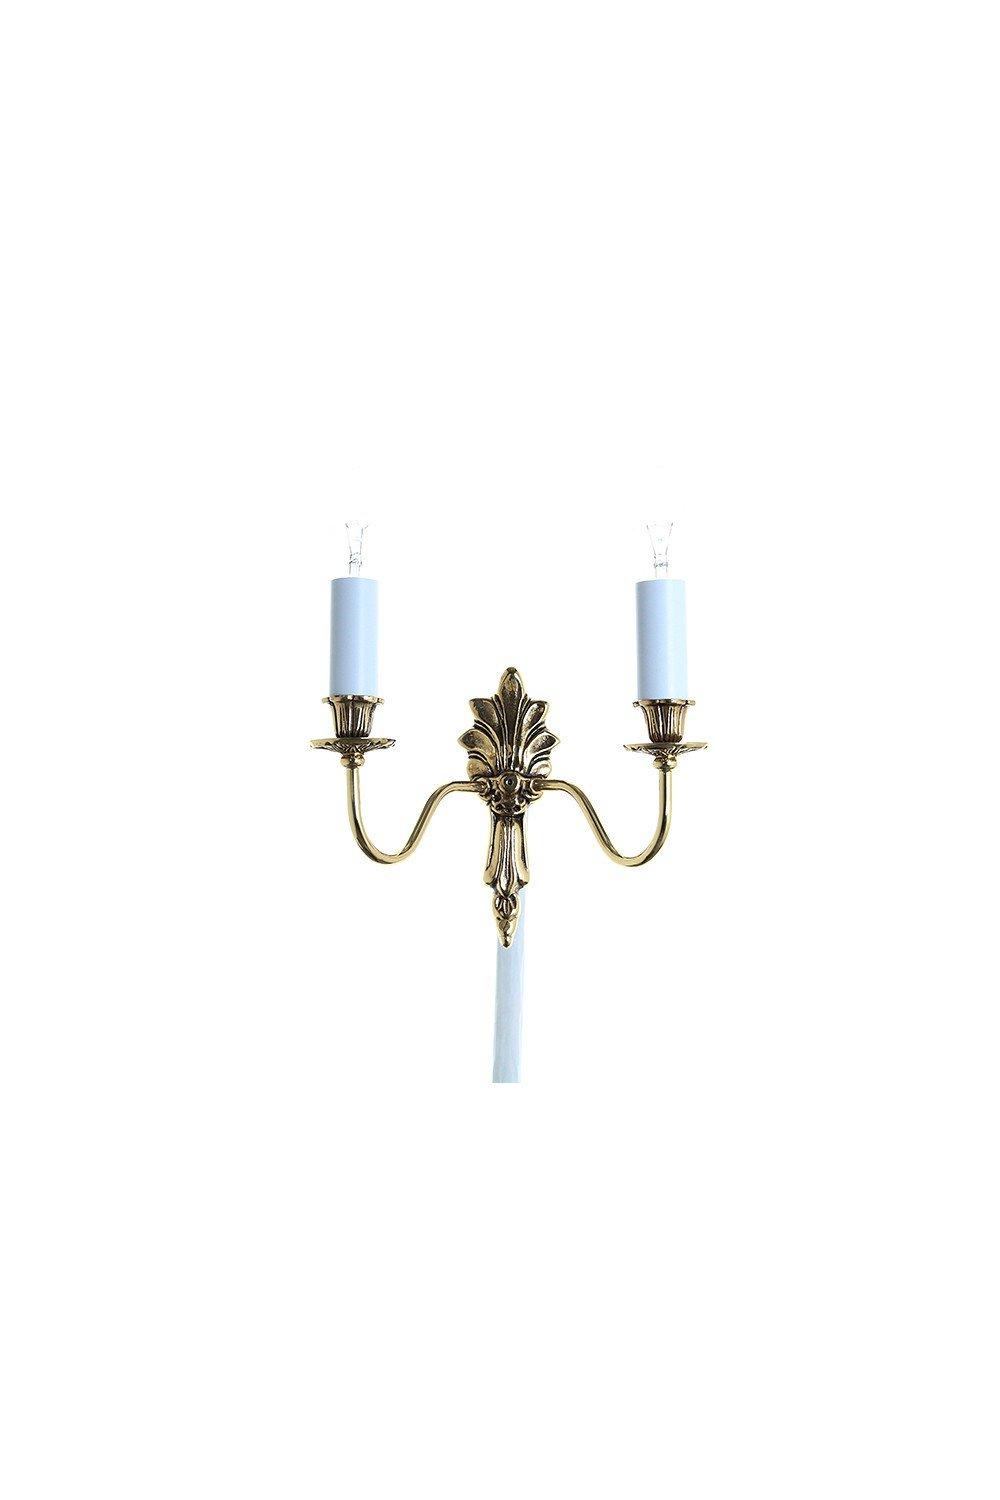 Goodwood Polished Brass Candle Wall Lamp